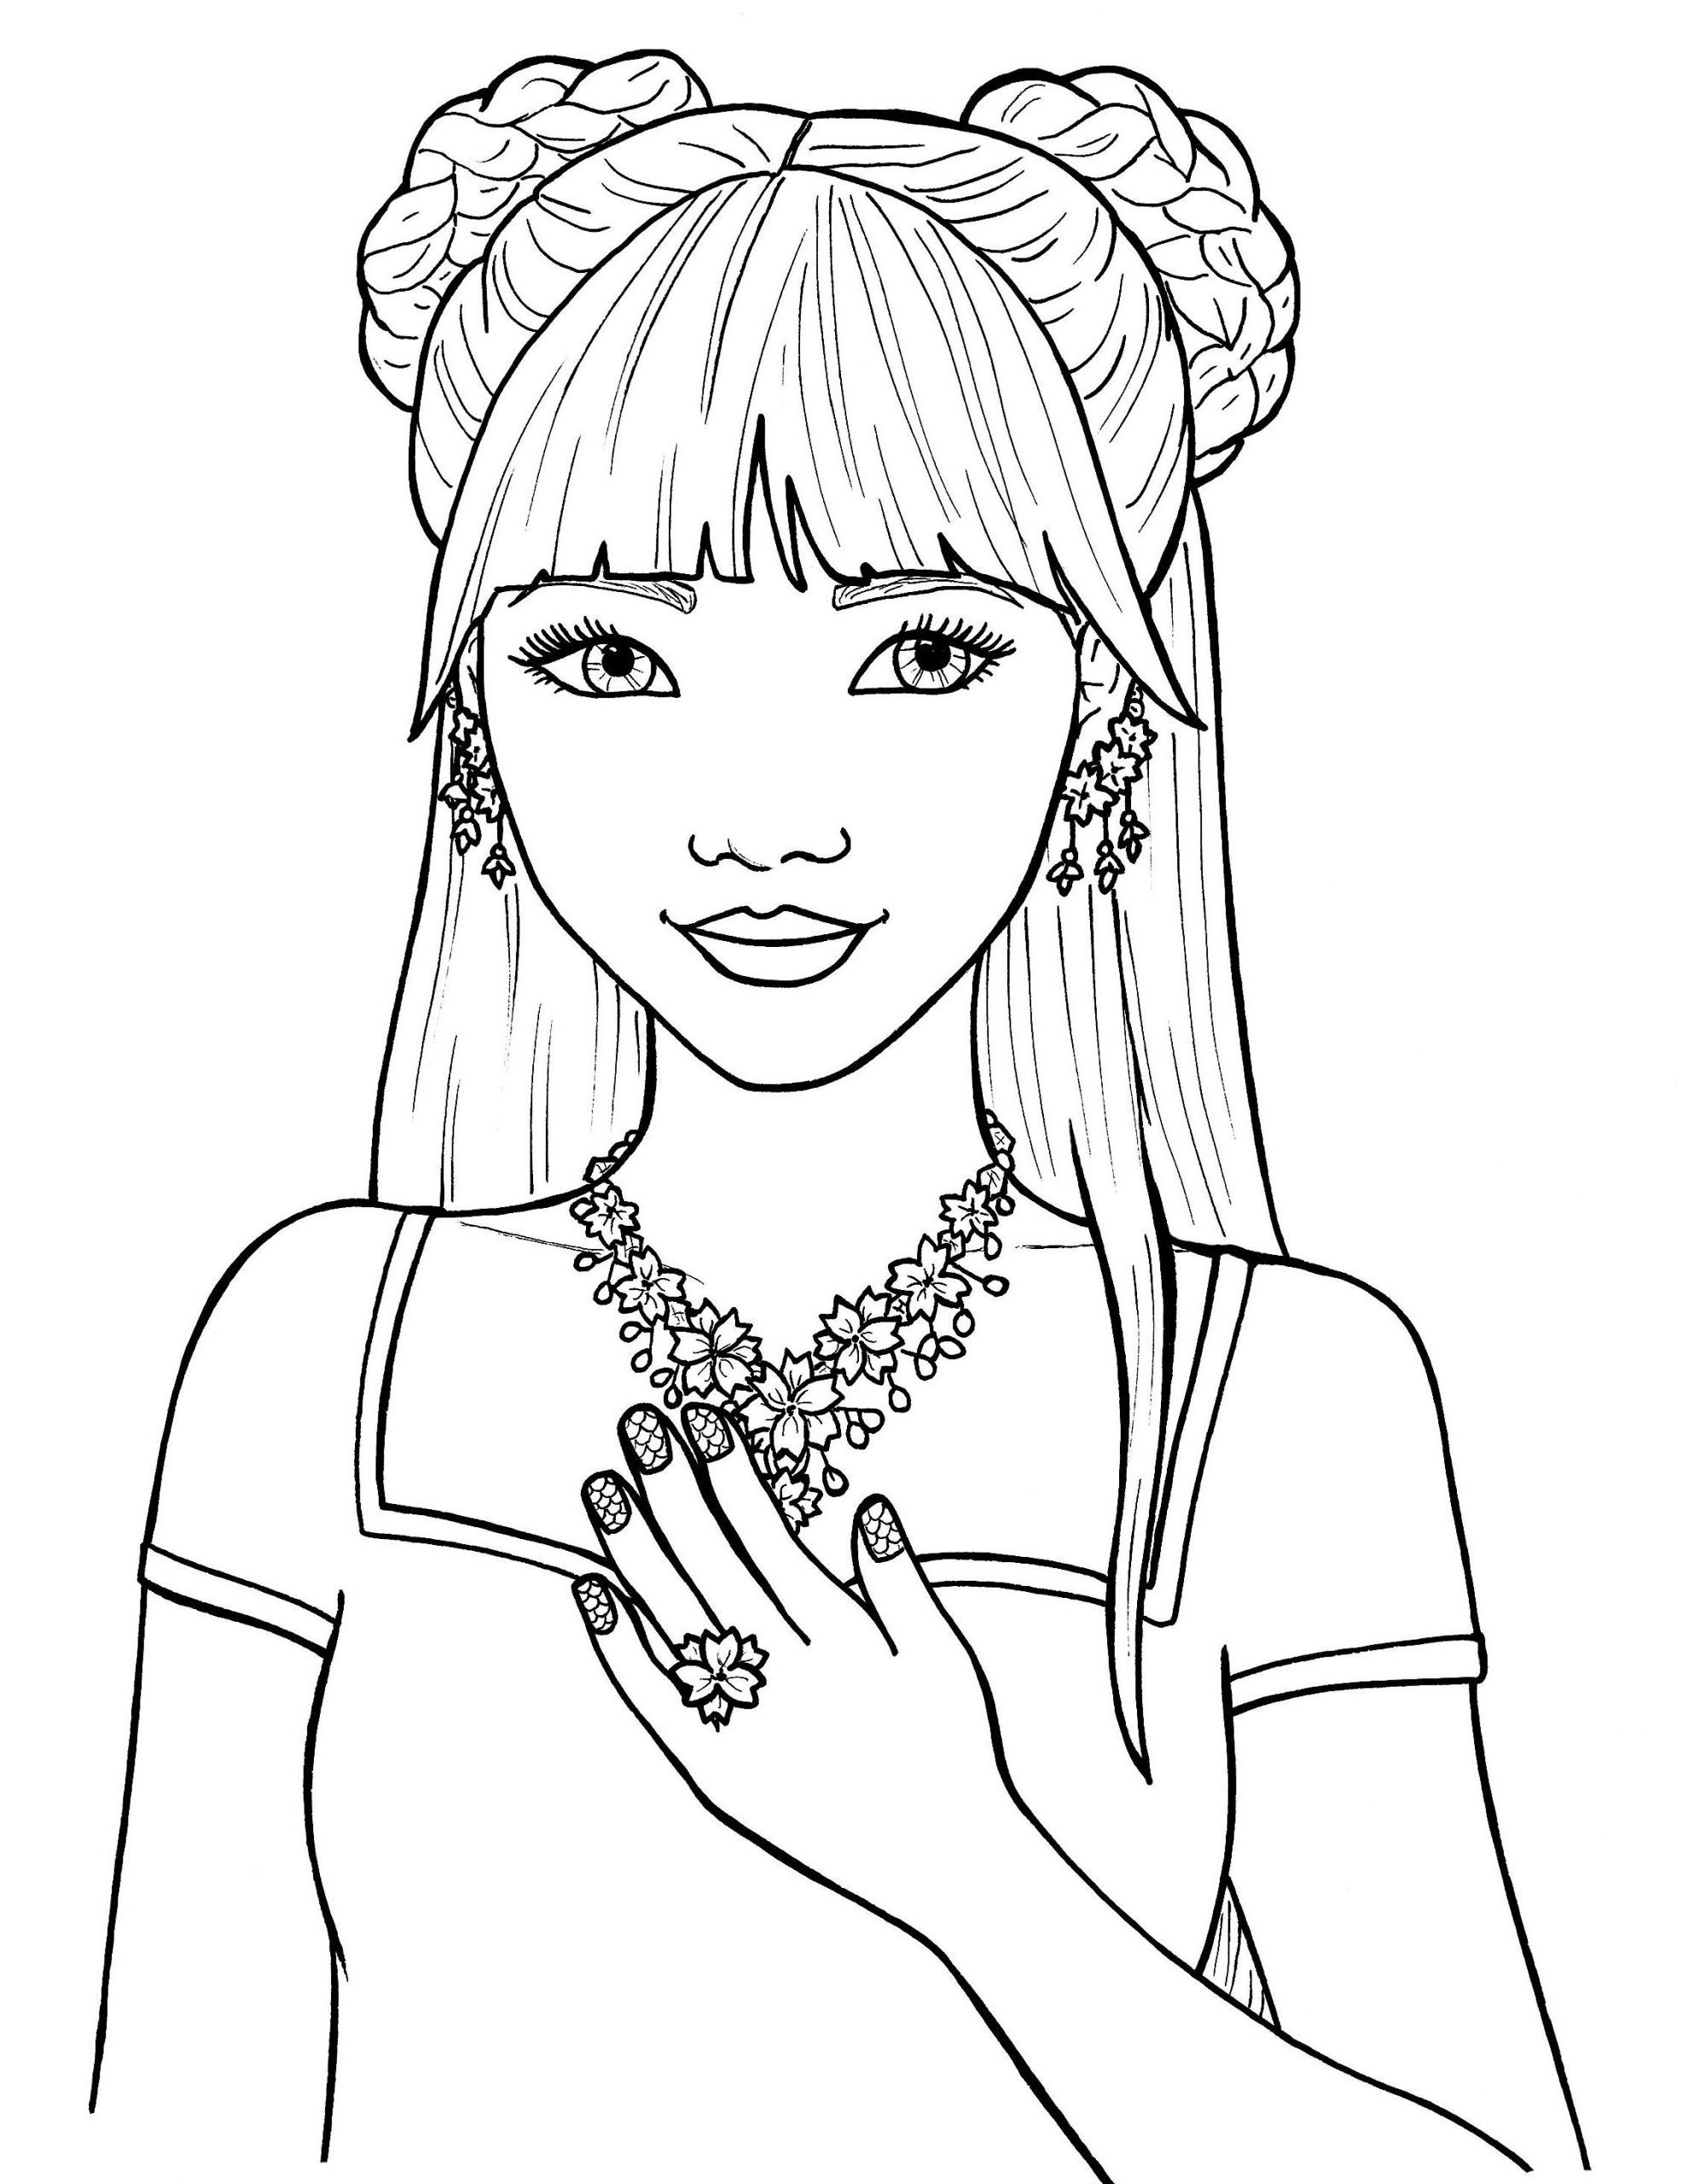 Free Coloring Pages Of Girls
 Pretty Girls Coloring Pages Free